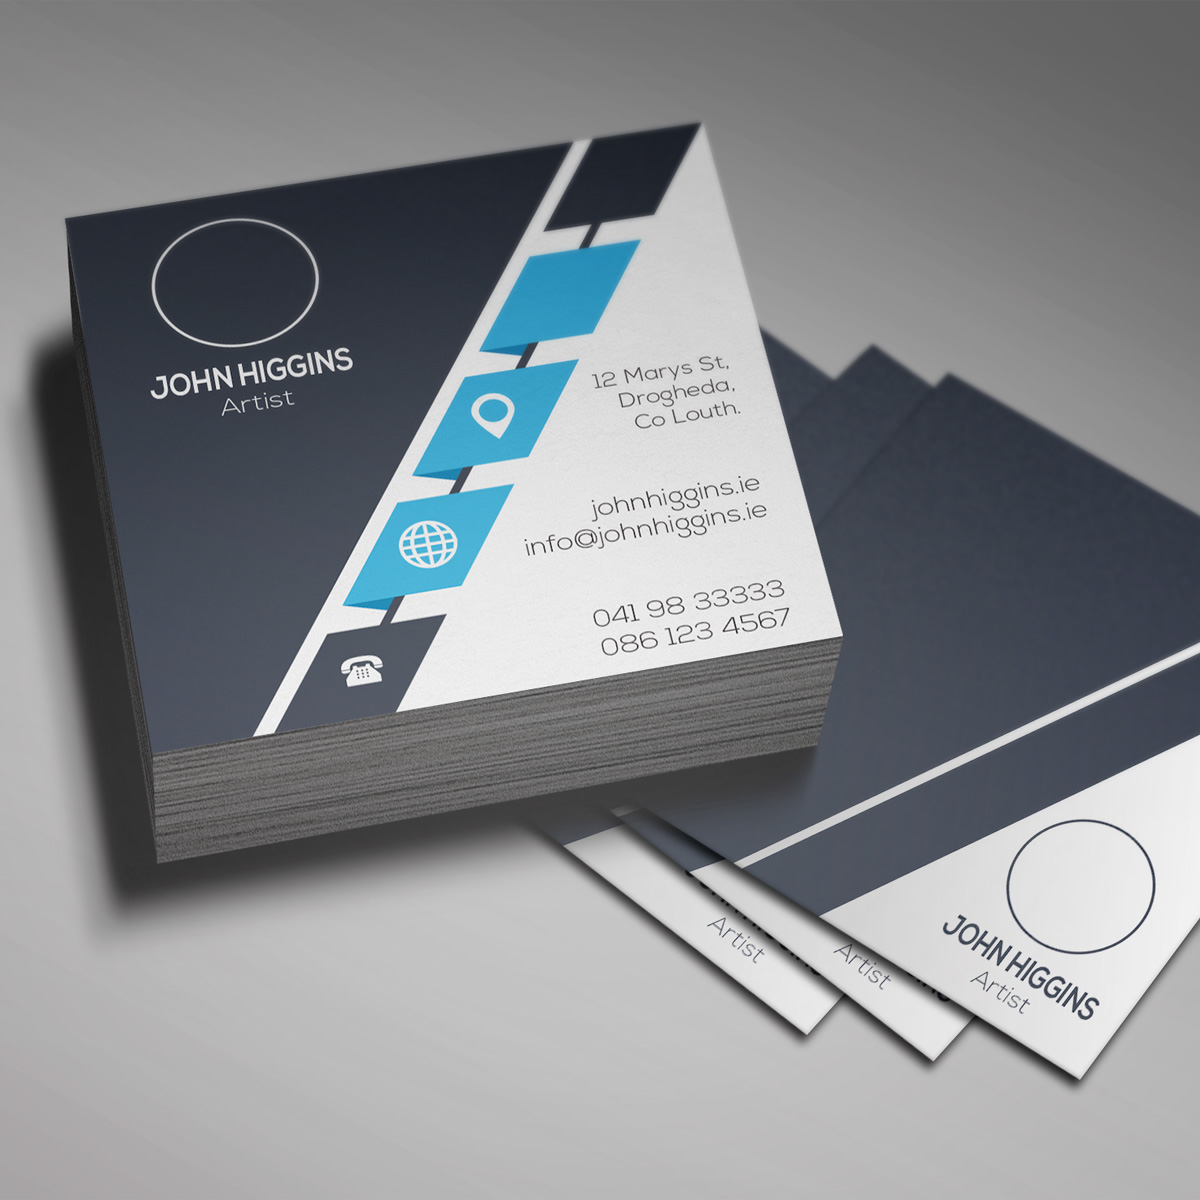 3x3 square business cards 1